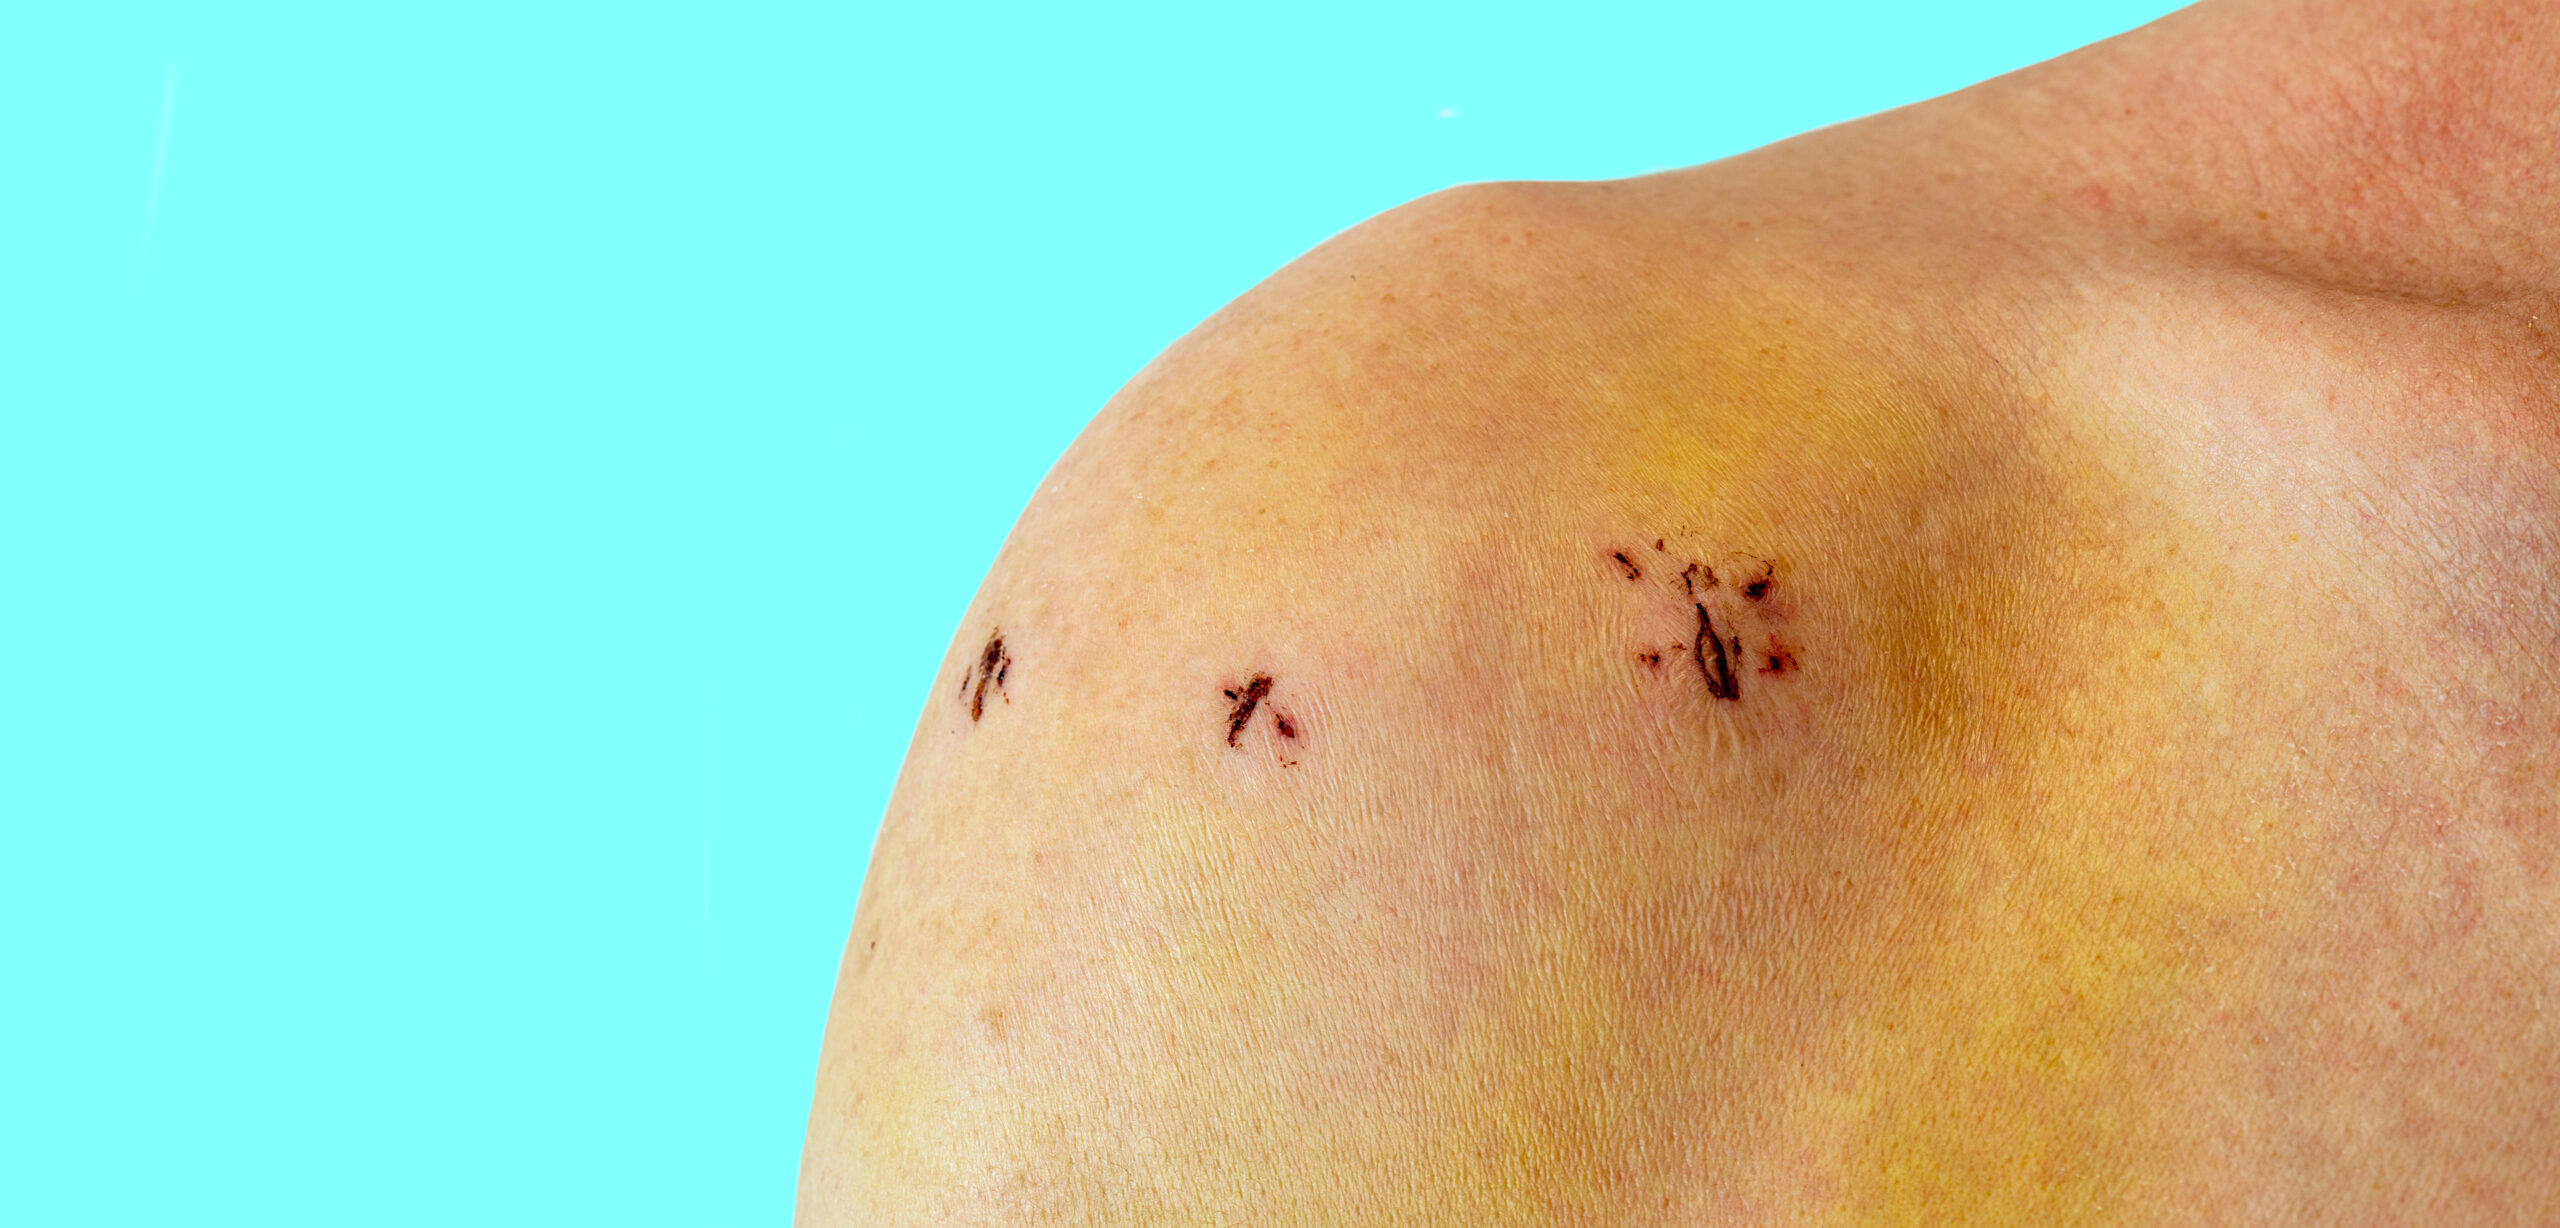 After a shoulder arthroscopy surgery, recovery takes approximately 1 to 2 weeks.